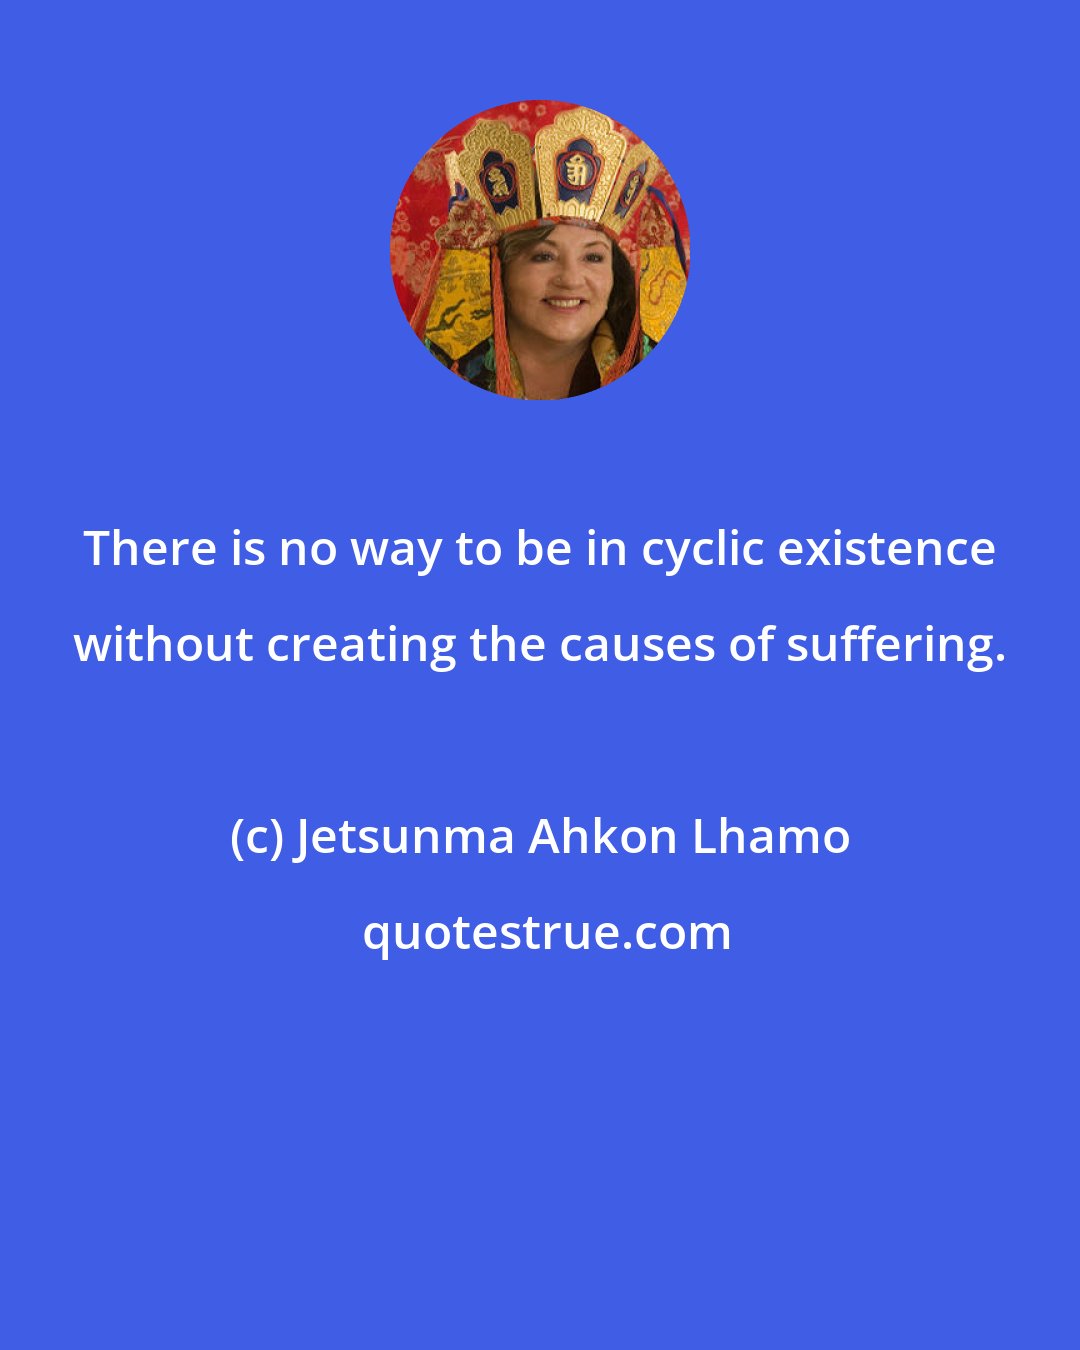 Jetsunma Ahkon Lhamo: There is no way to be in cyclic existence without creating the causes of suffering.